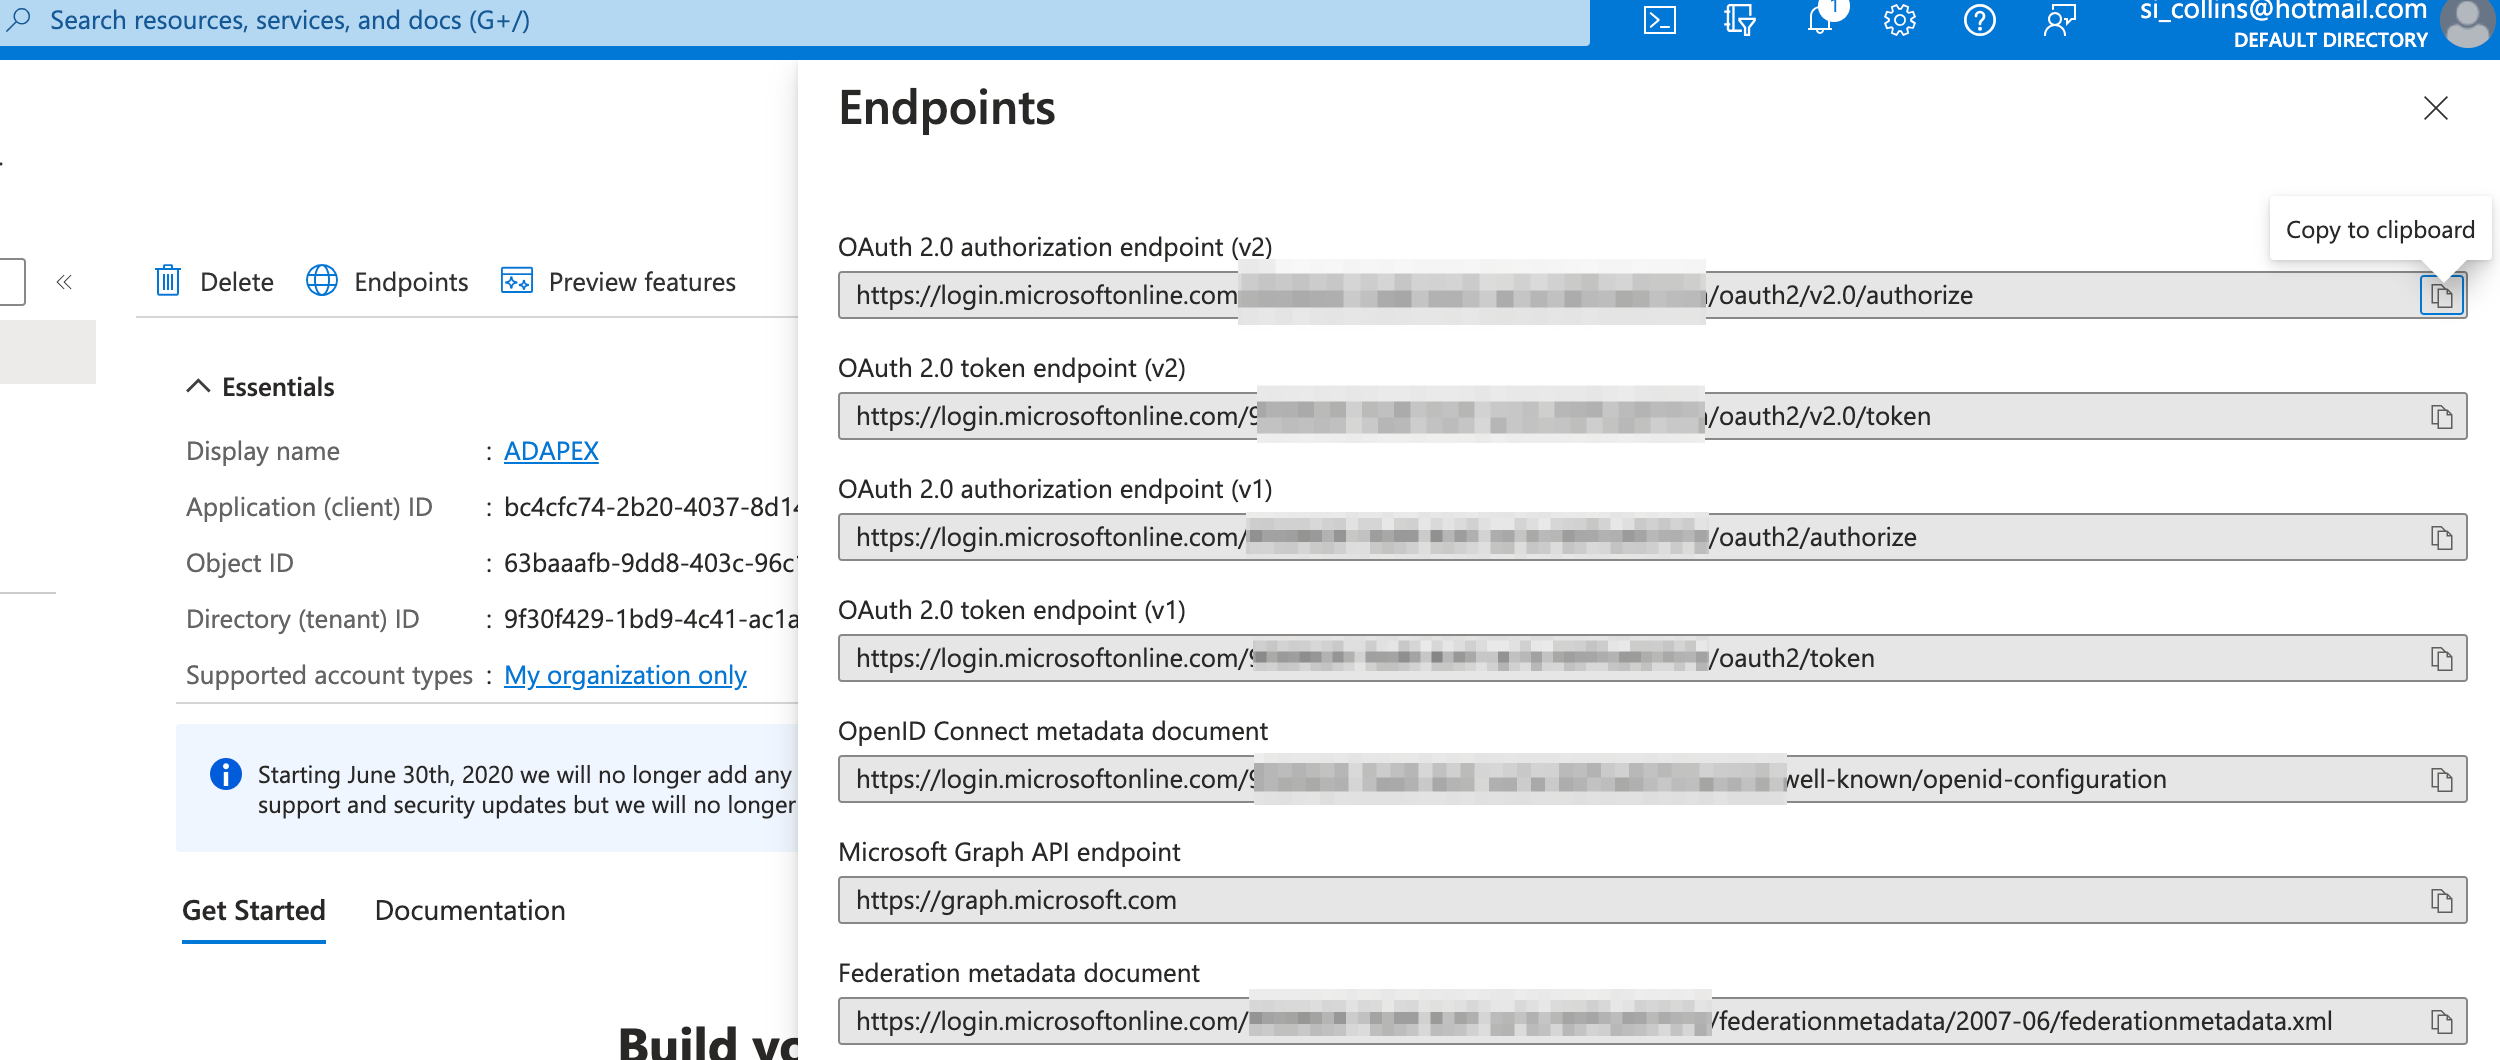 Screenshot of Microsoft Azure Console showing endpoints available for an application